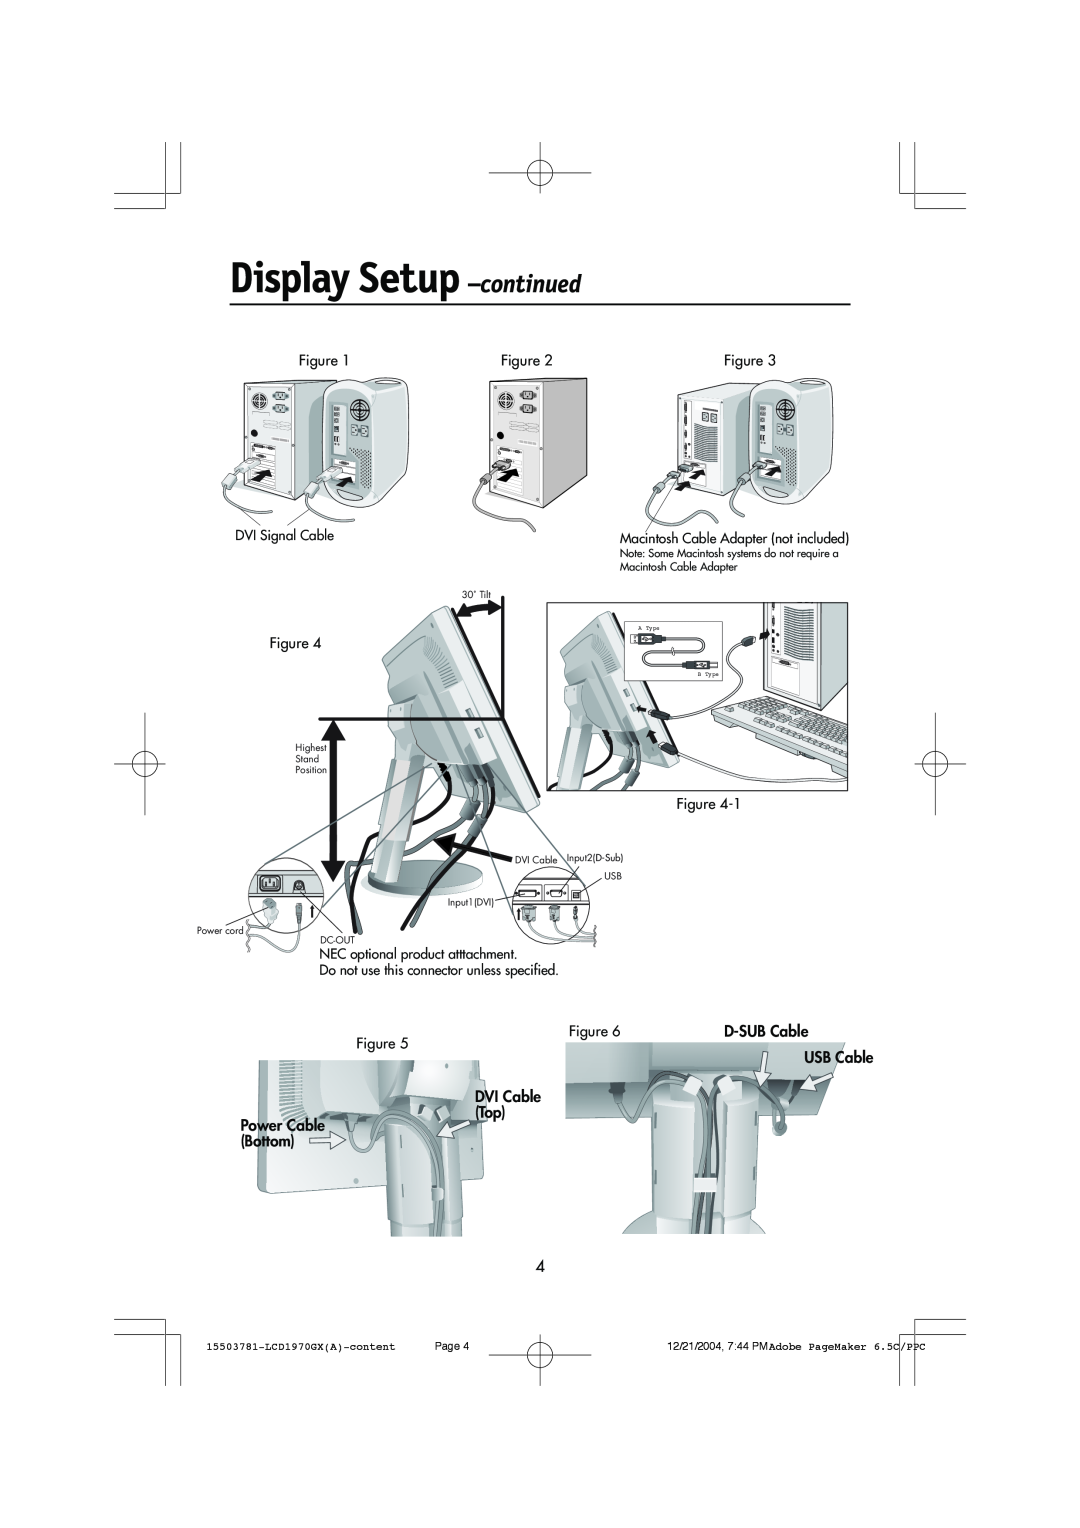 NEC Display Setup -continued, 15503781-LCD1970GXA-content, Page, 30˚ Tilt, Highest Stand Position, Input2D-Sub USB 